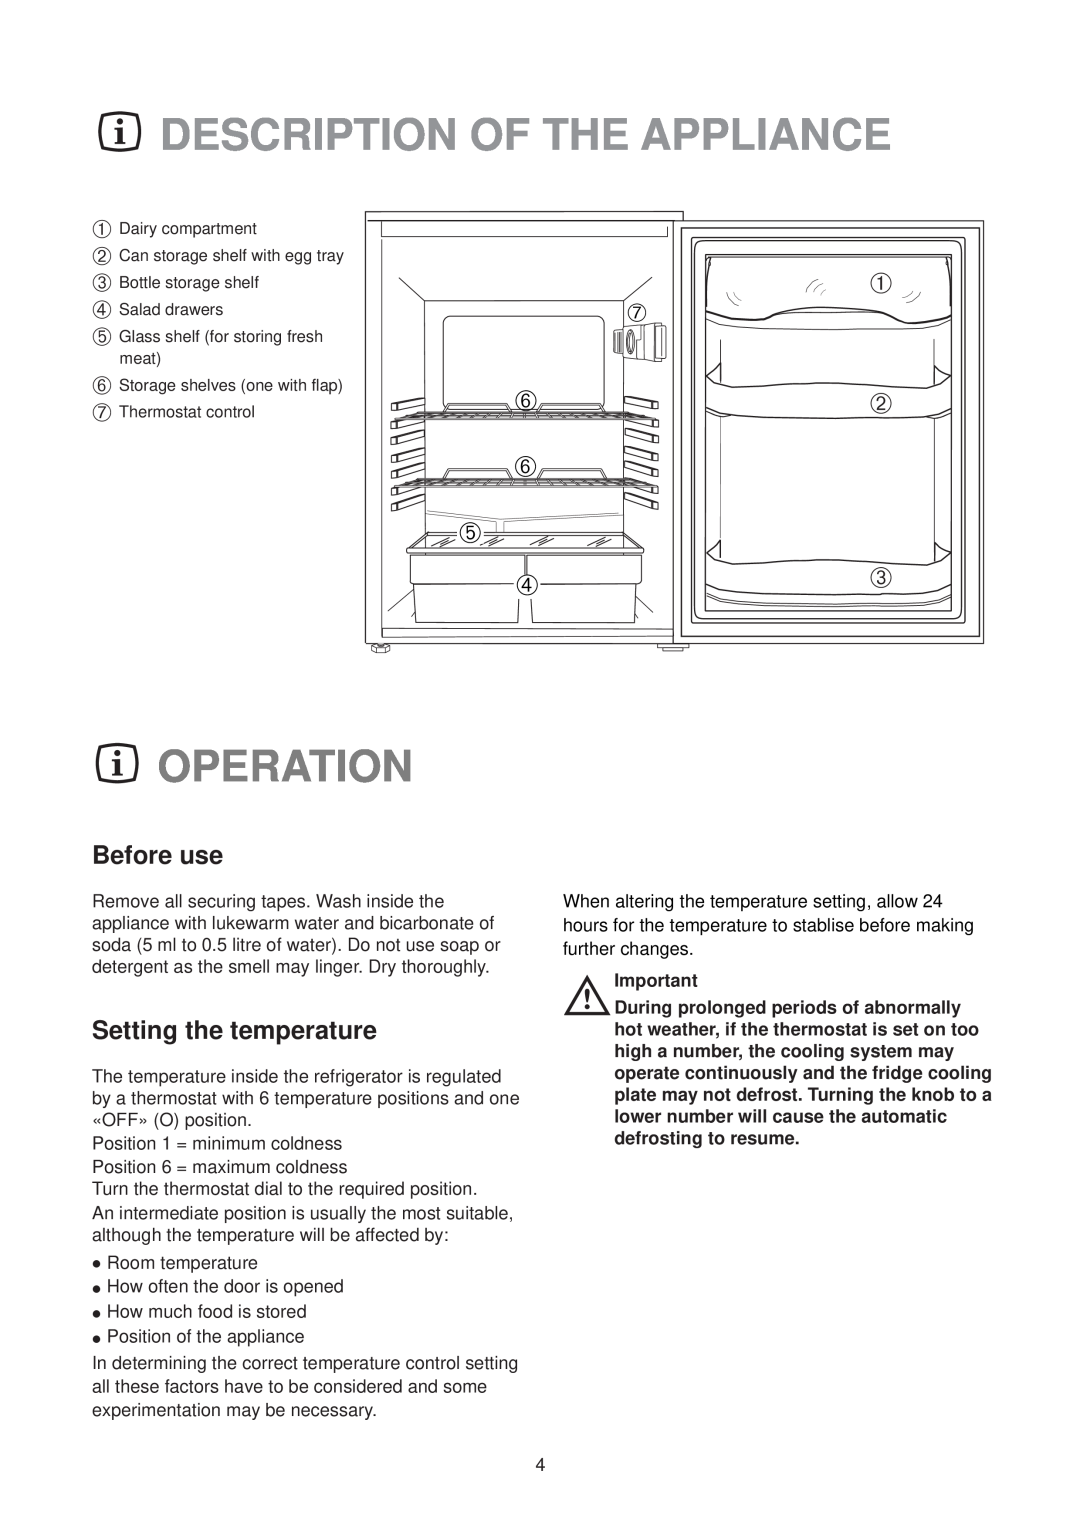 Zanussi ZTR 56 RN, ZTR 56 RL manual Description Of The Appliance, Operation, Before use, Setting the temperature 